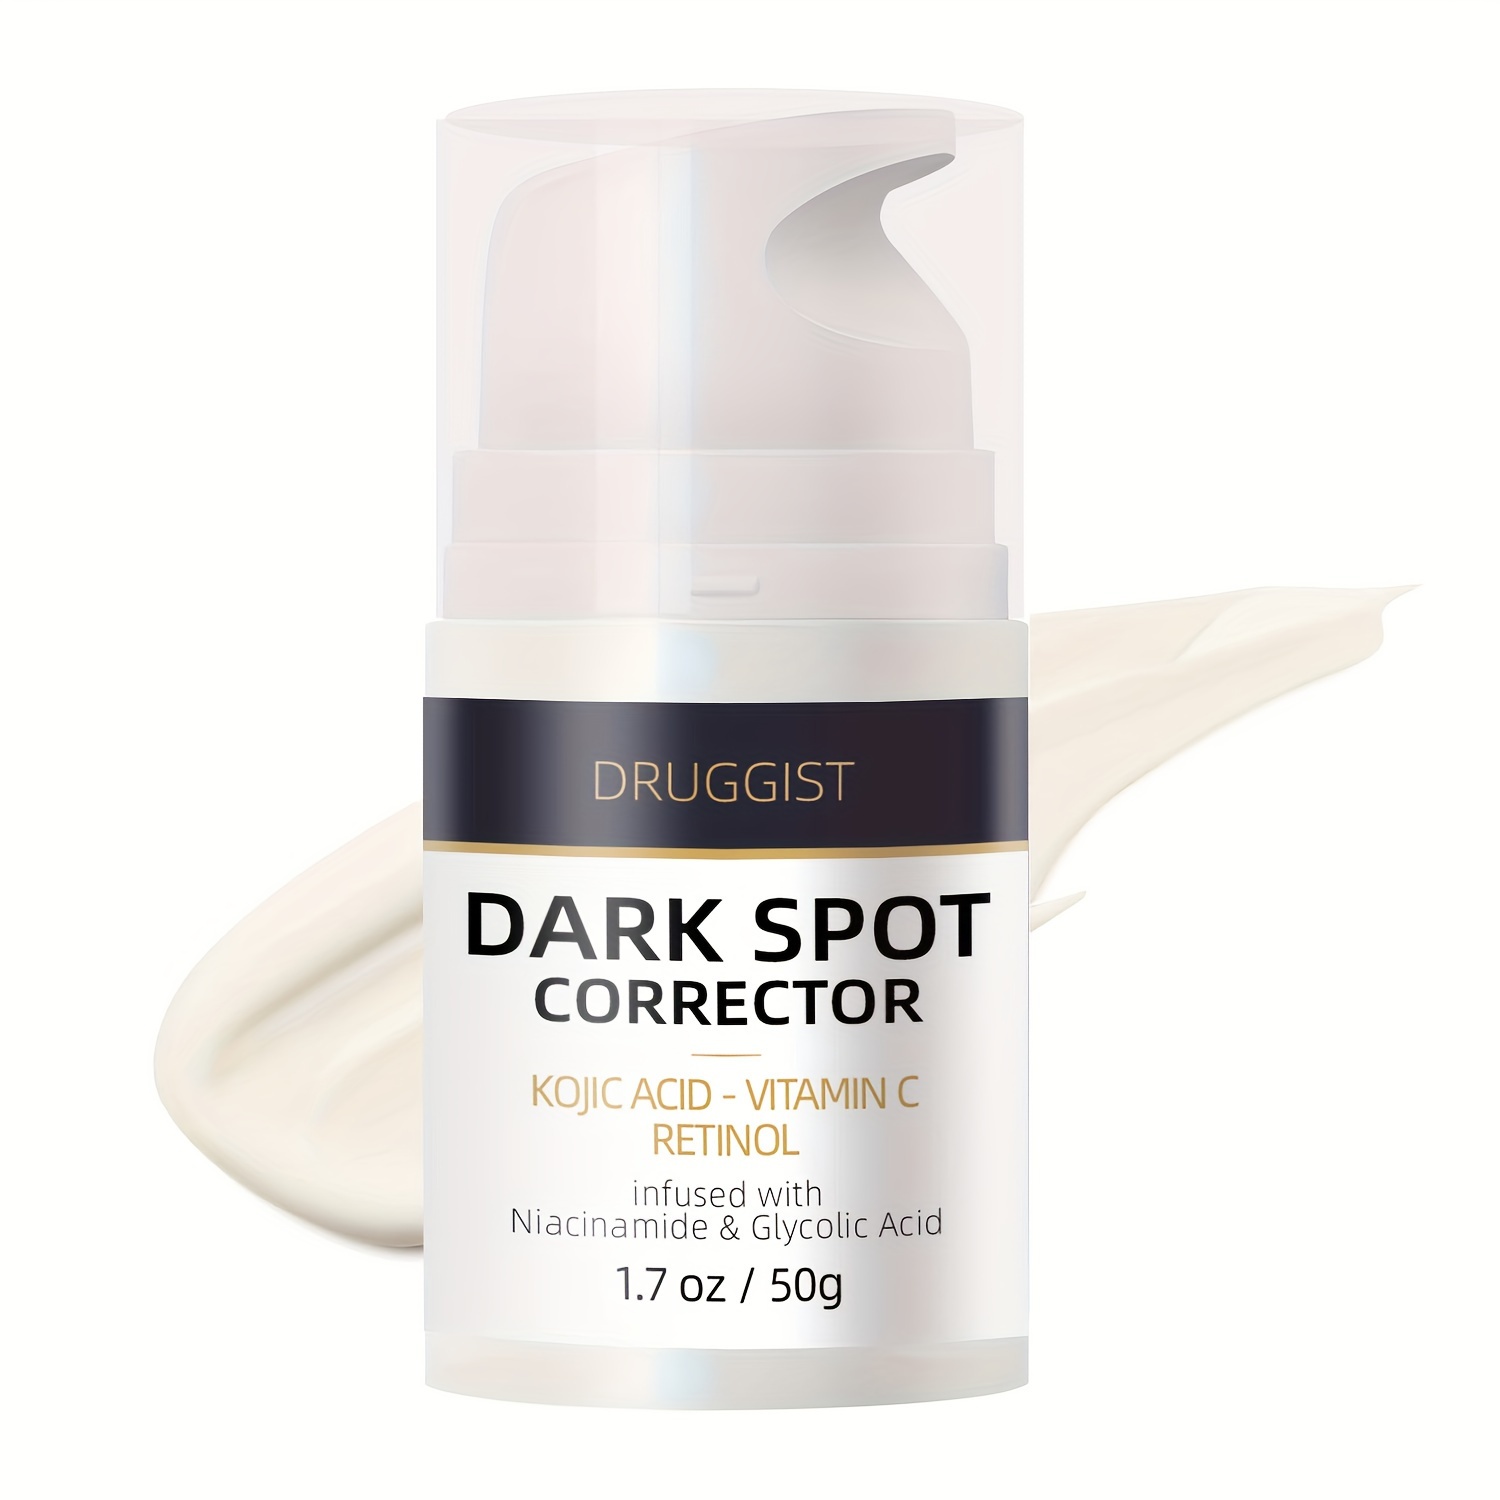 

1.7oz/50ml, Dark Spot Corrector For - Contains Kojic Acid, Vitamin C & Retinol - Infused With Niacinamide & Glycolic Acid, Effectively Remove Hyperpigmentation & Marks